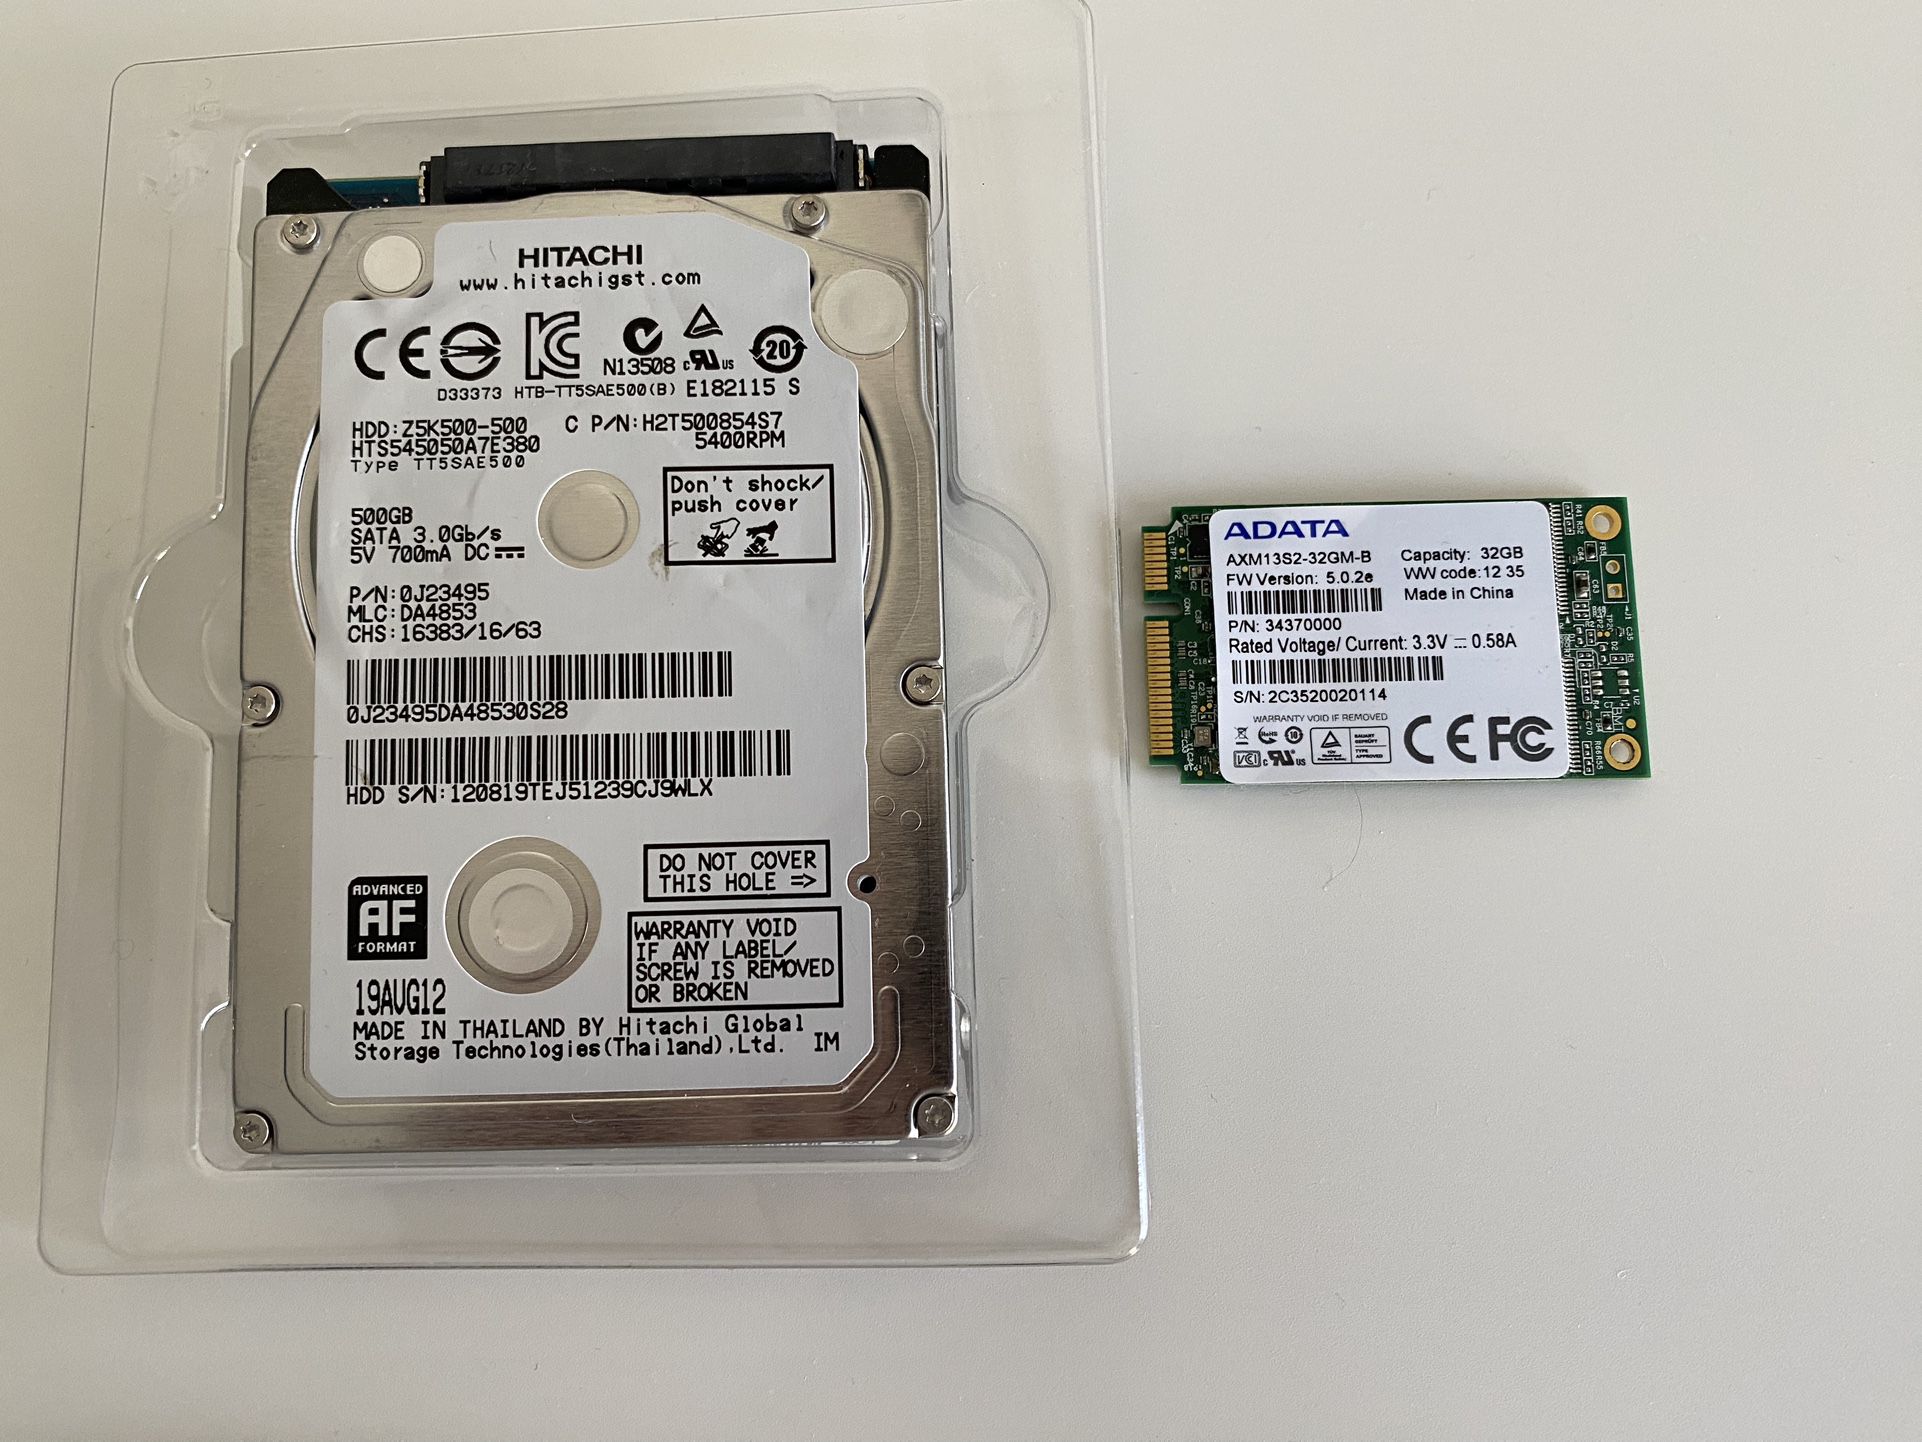 Internal HDD for laptop 